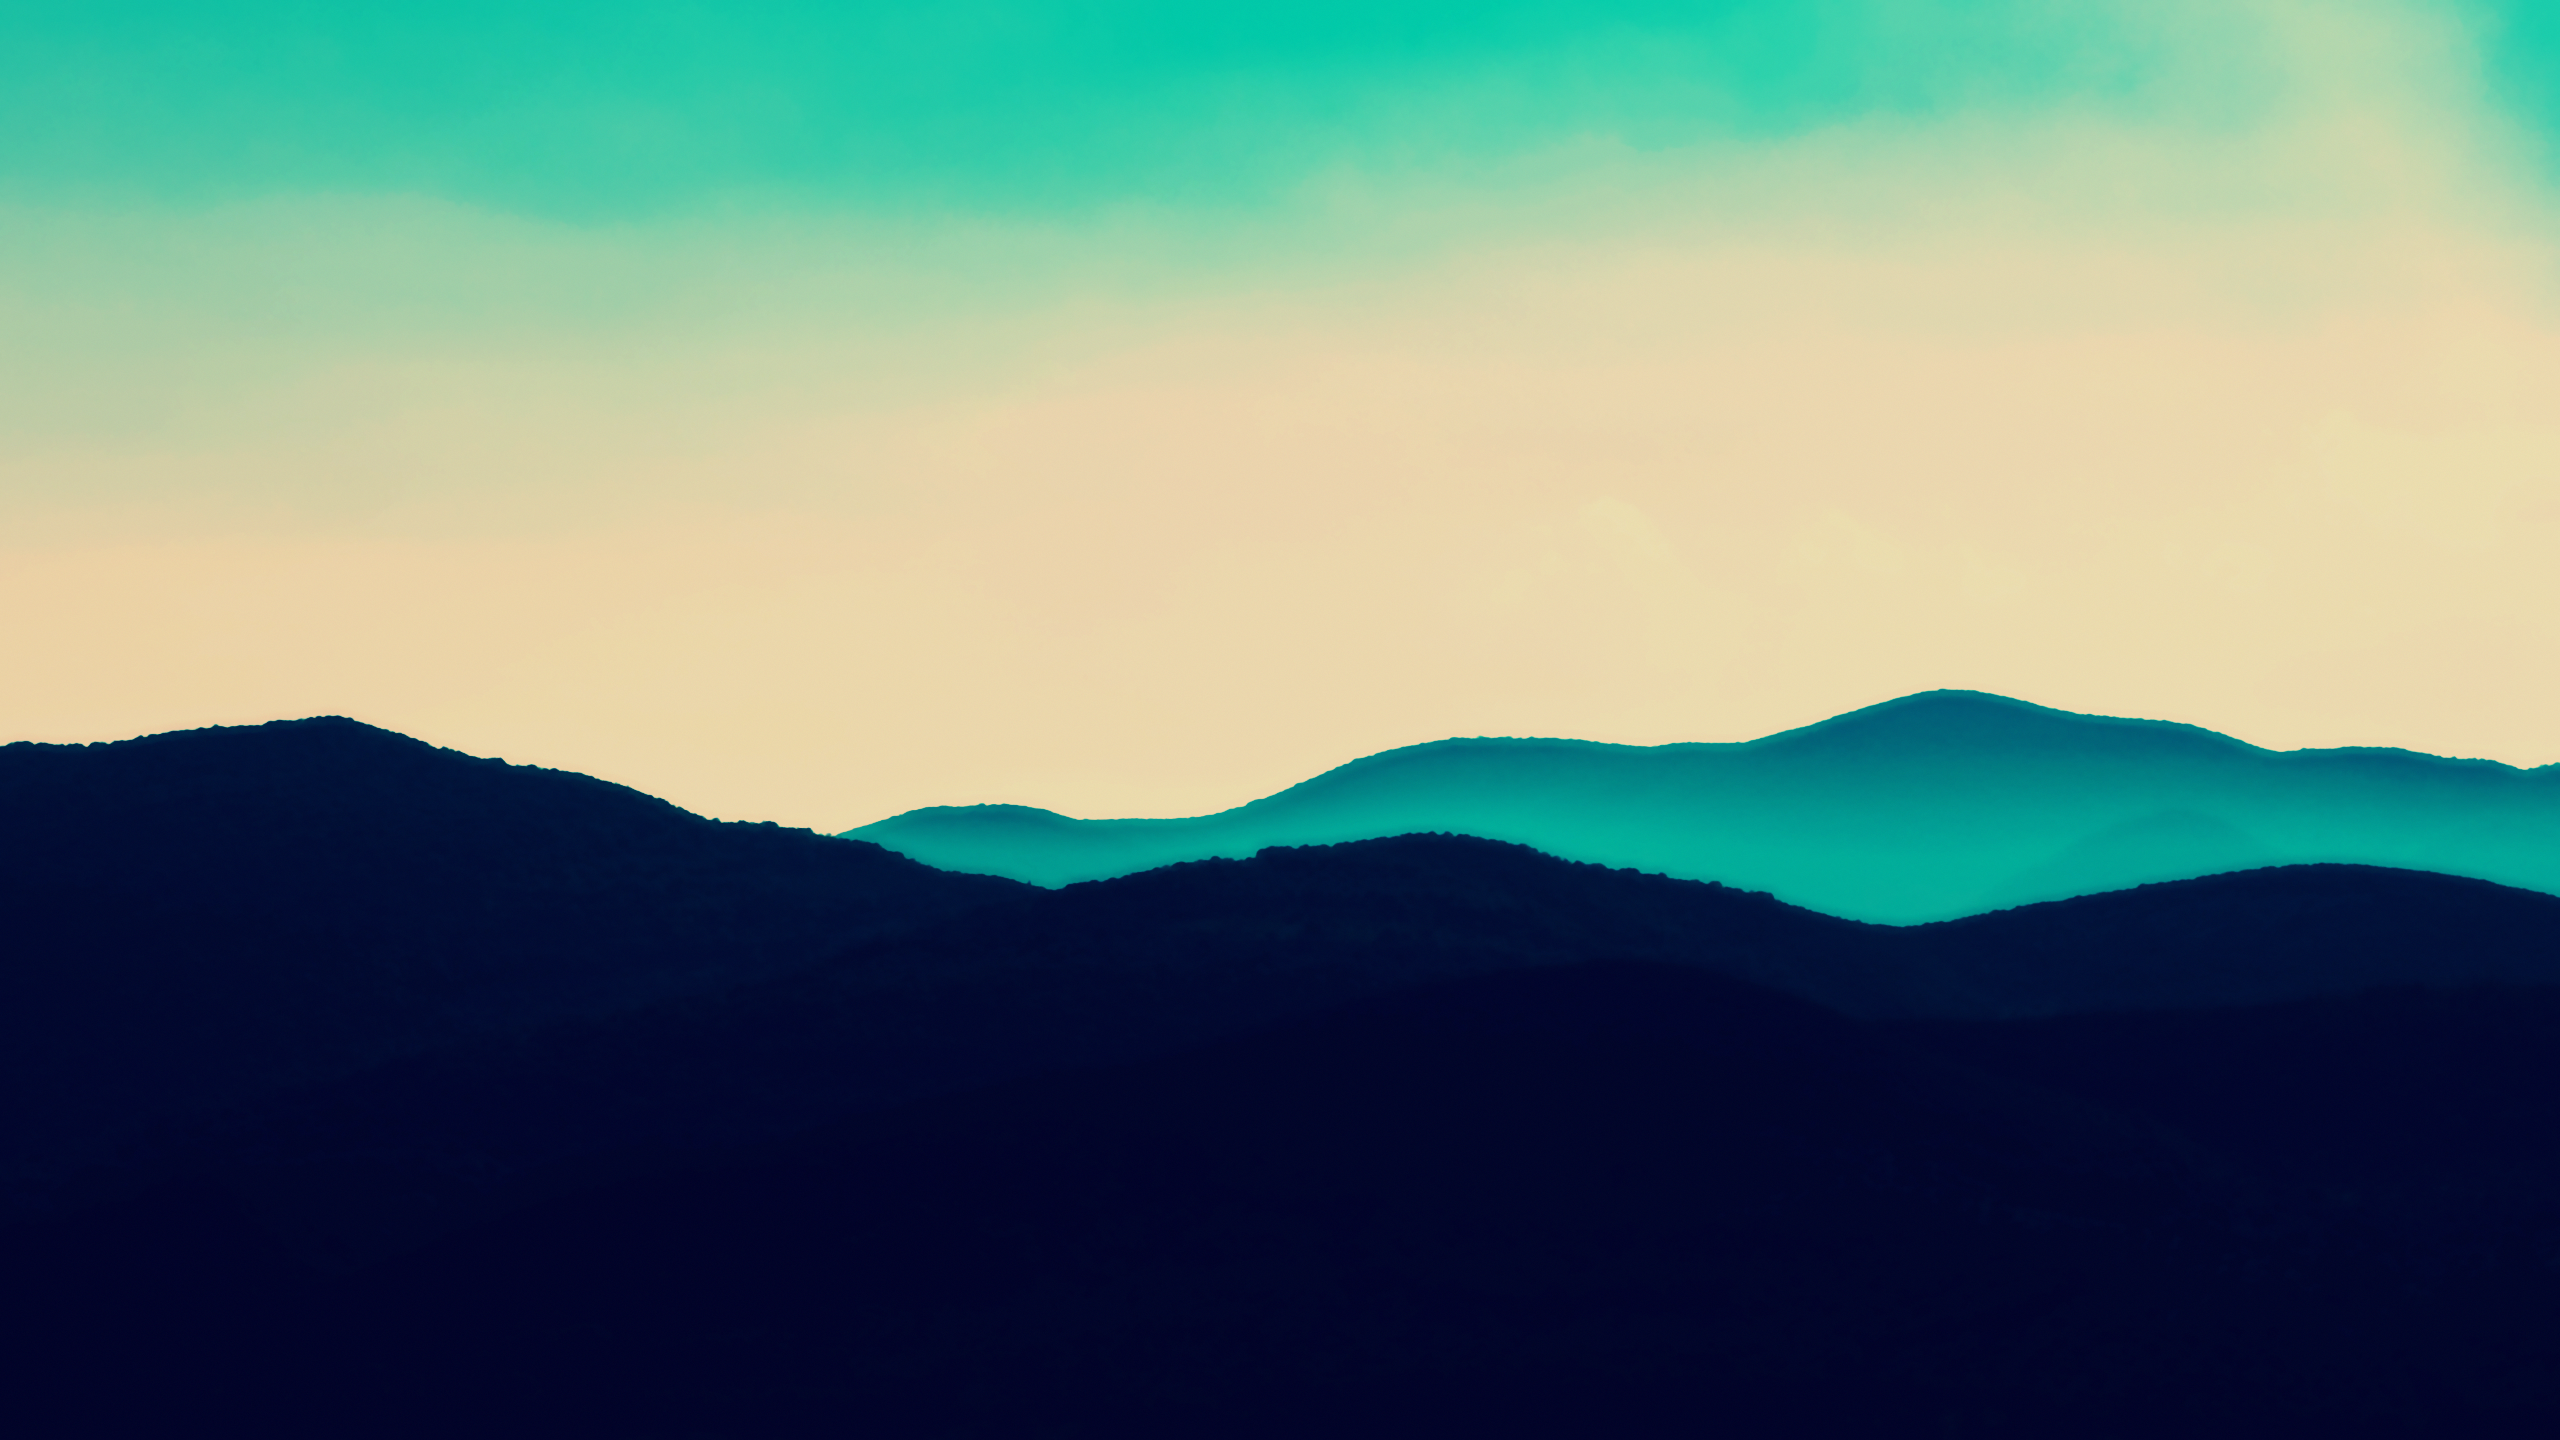 General 2560x1440 landscape hills mountains bright blue Skye clouds turquoise